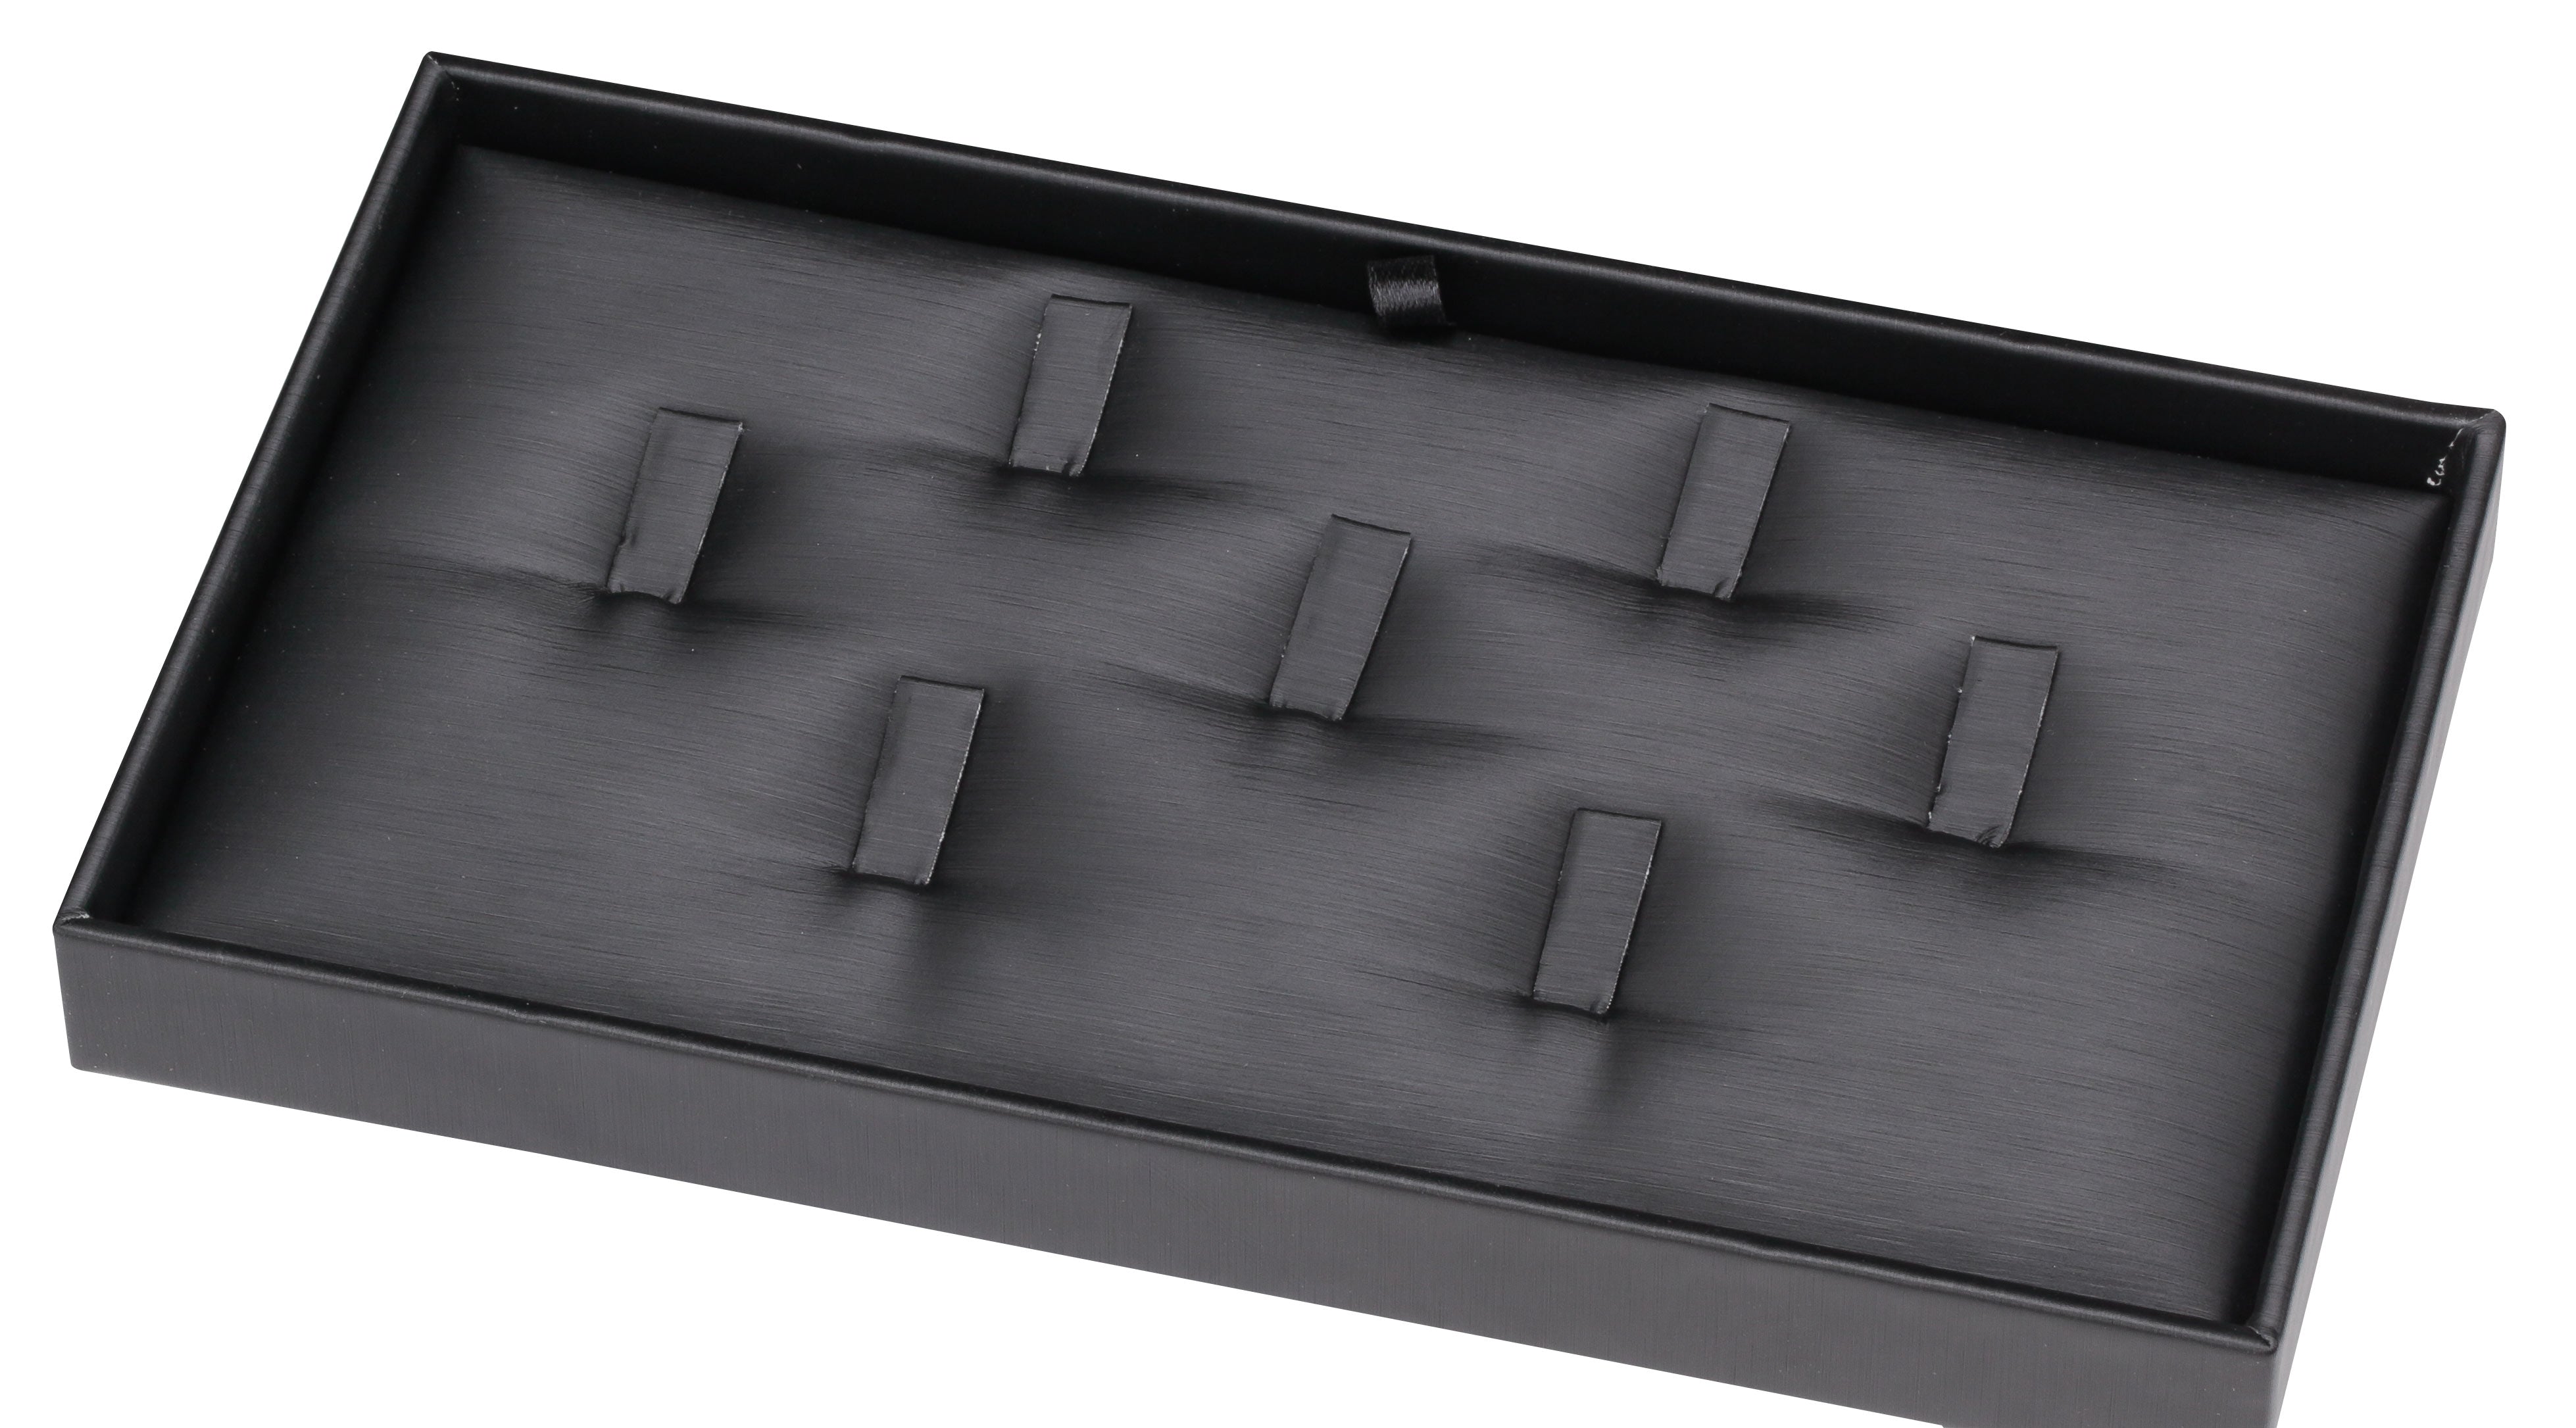 7-Clip Configurable Inner Ring Trays, 8.13" L x 4.63" W